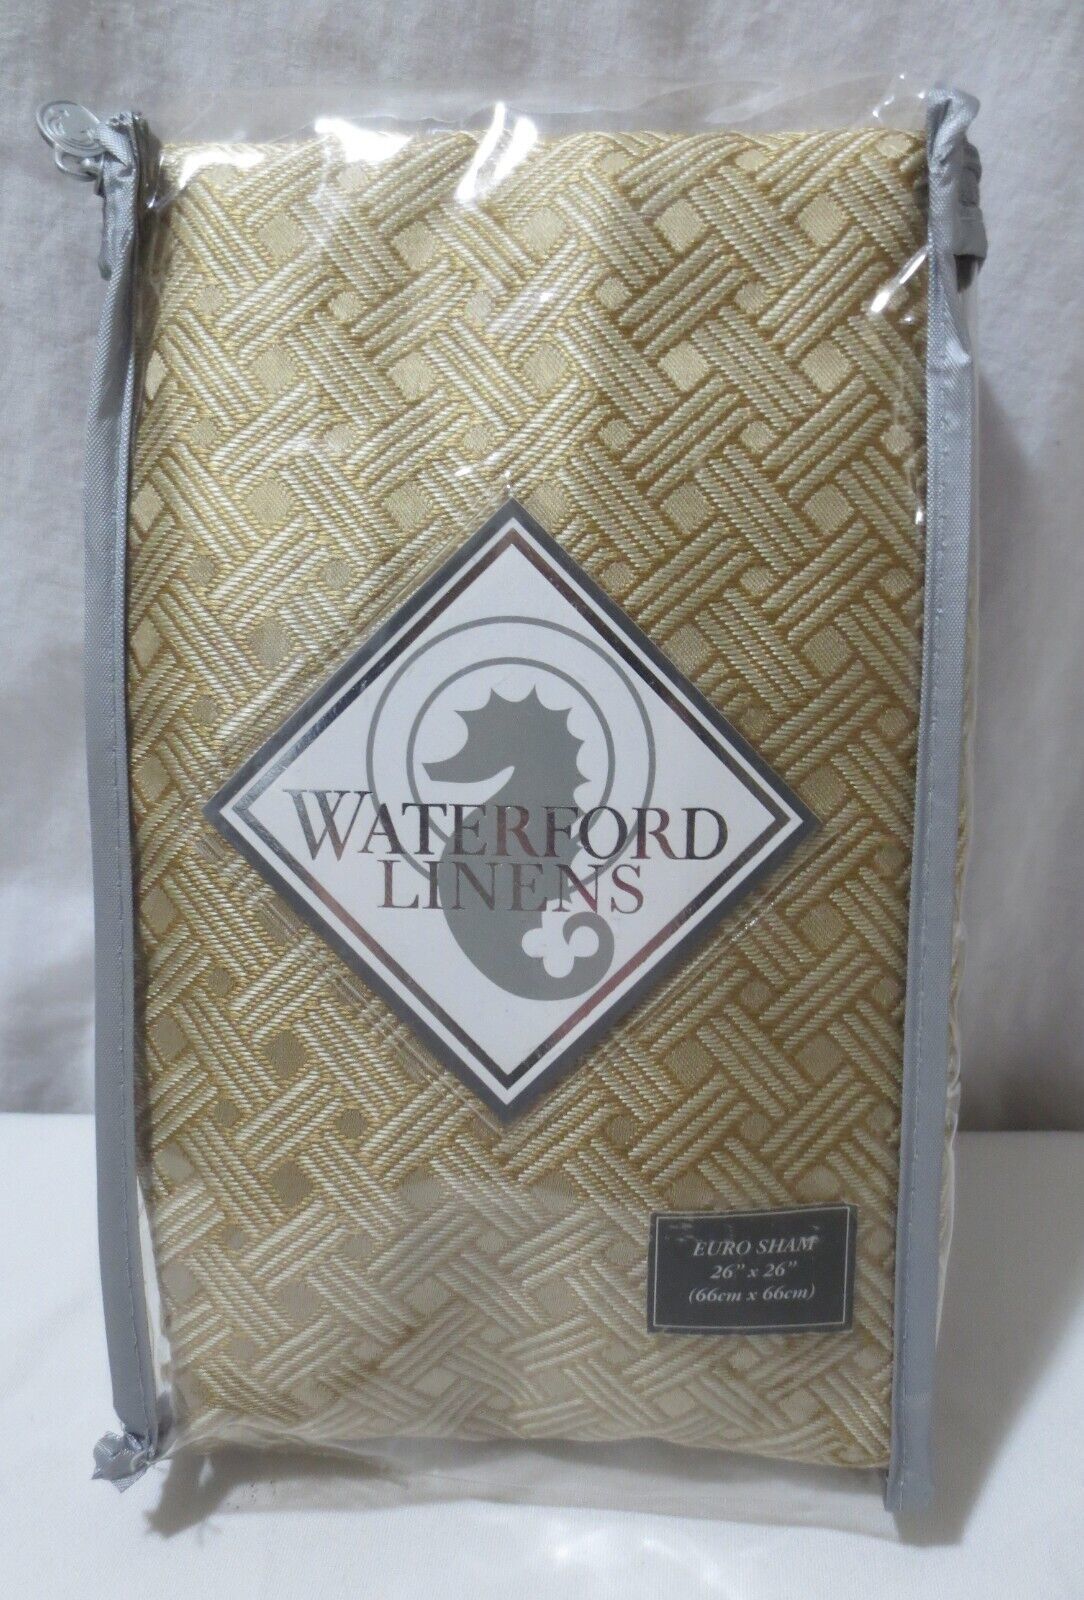 Primary image for Waterford Euro Sham Lynath Gold New New in Package 26" x 26"